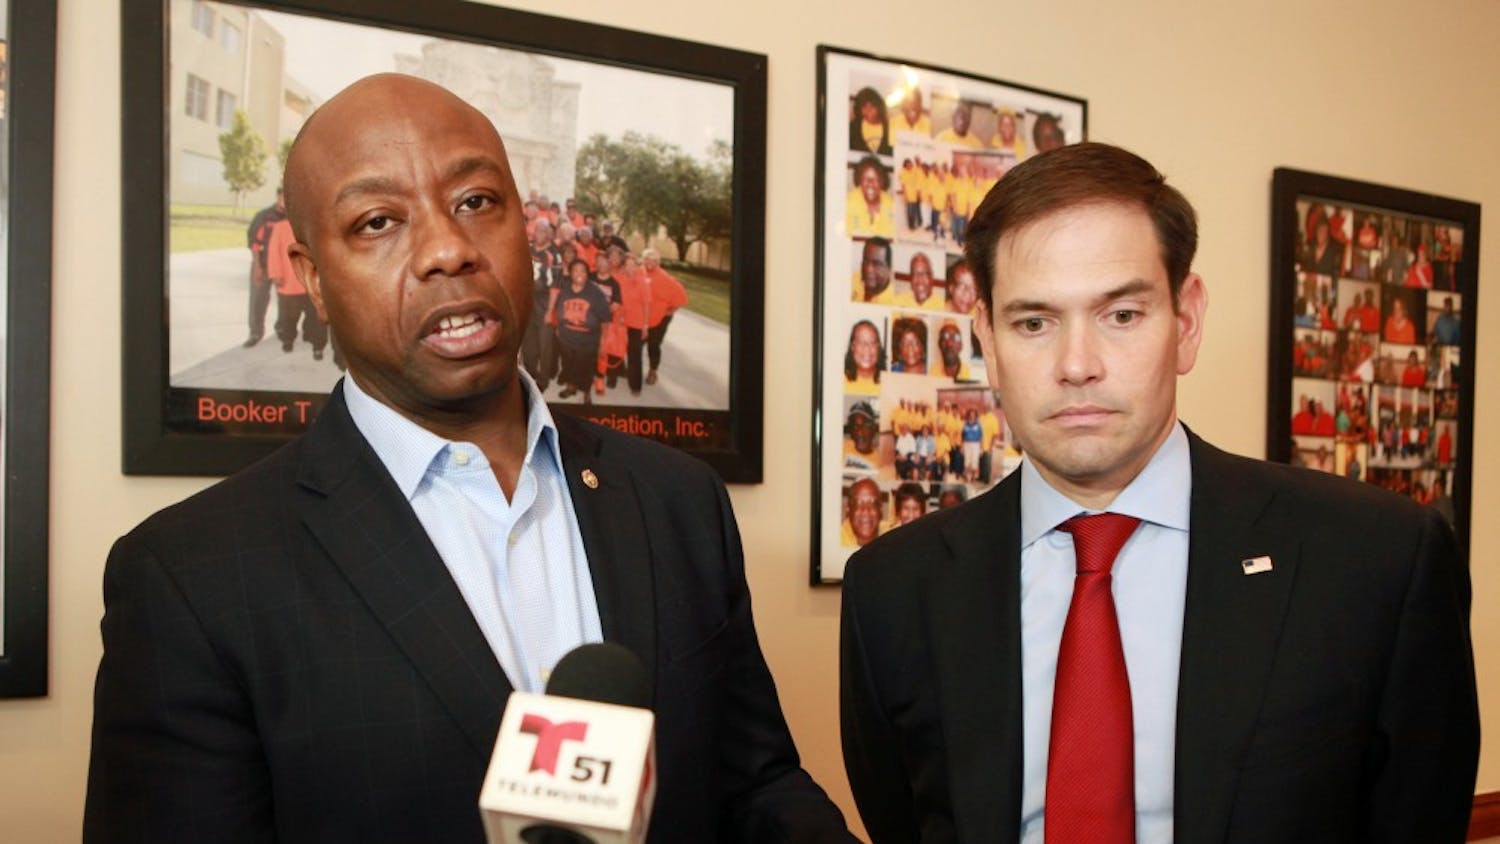 Senators Tim Scott, left, and Marco Rubio talk to the media after the meeting with religious leaders at Jackson Soul Food on Wednesday Nov. 2, 2016 in Miami. (Roberto Koltun/Miami Herald/TNS) 